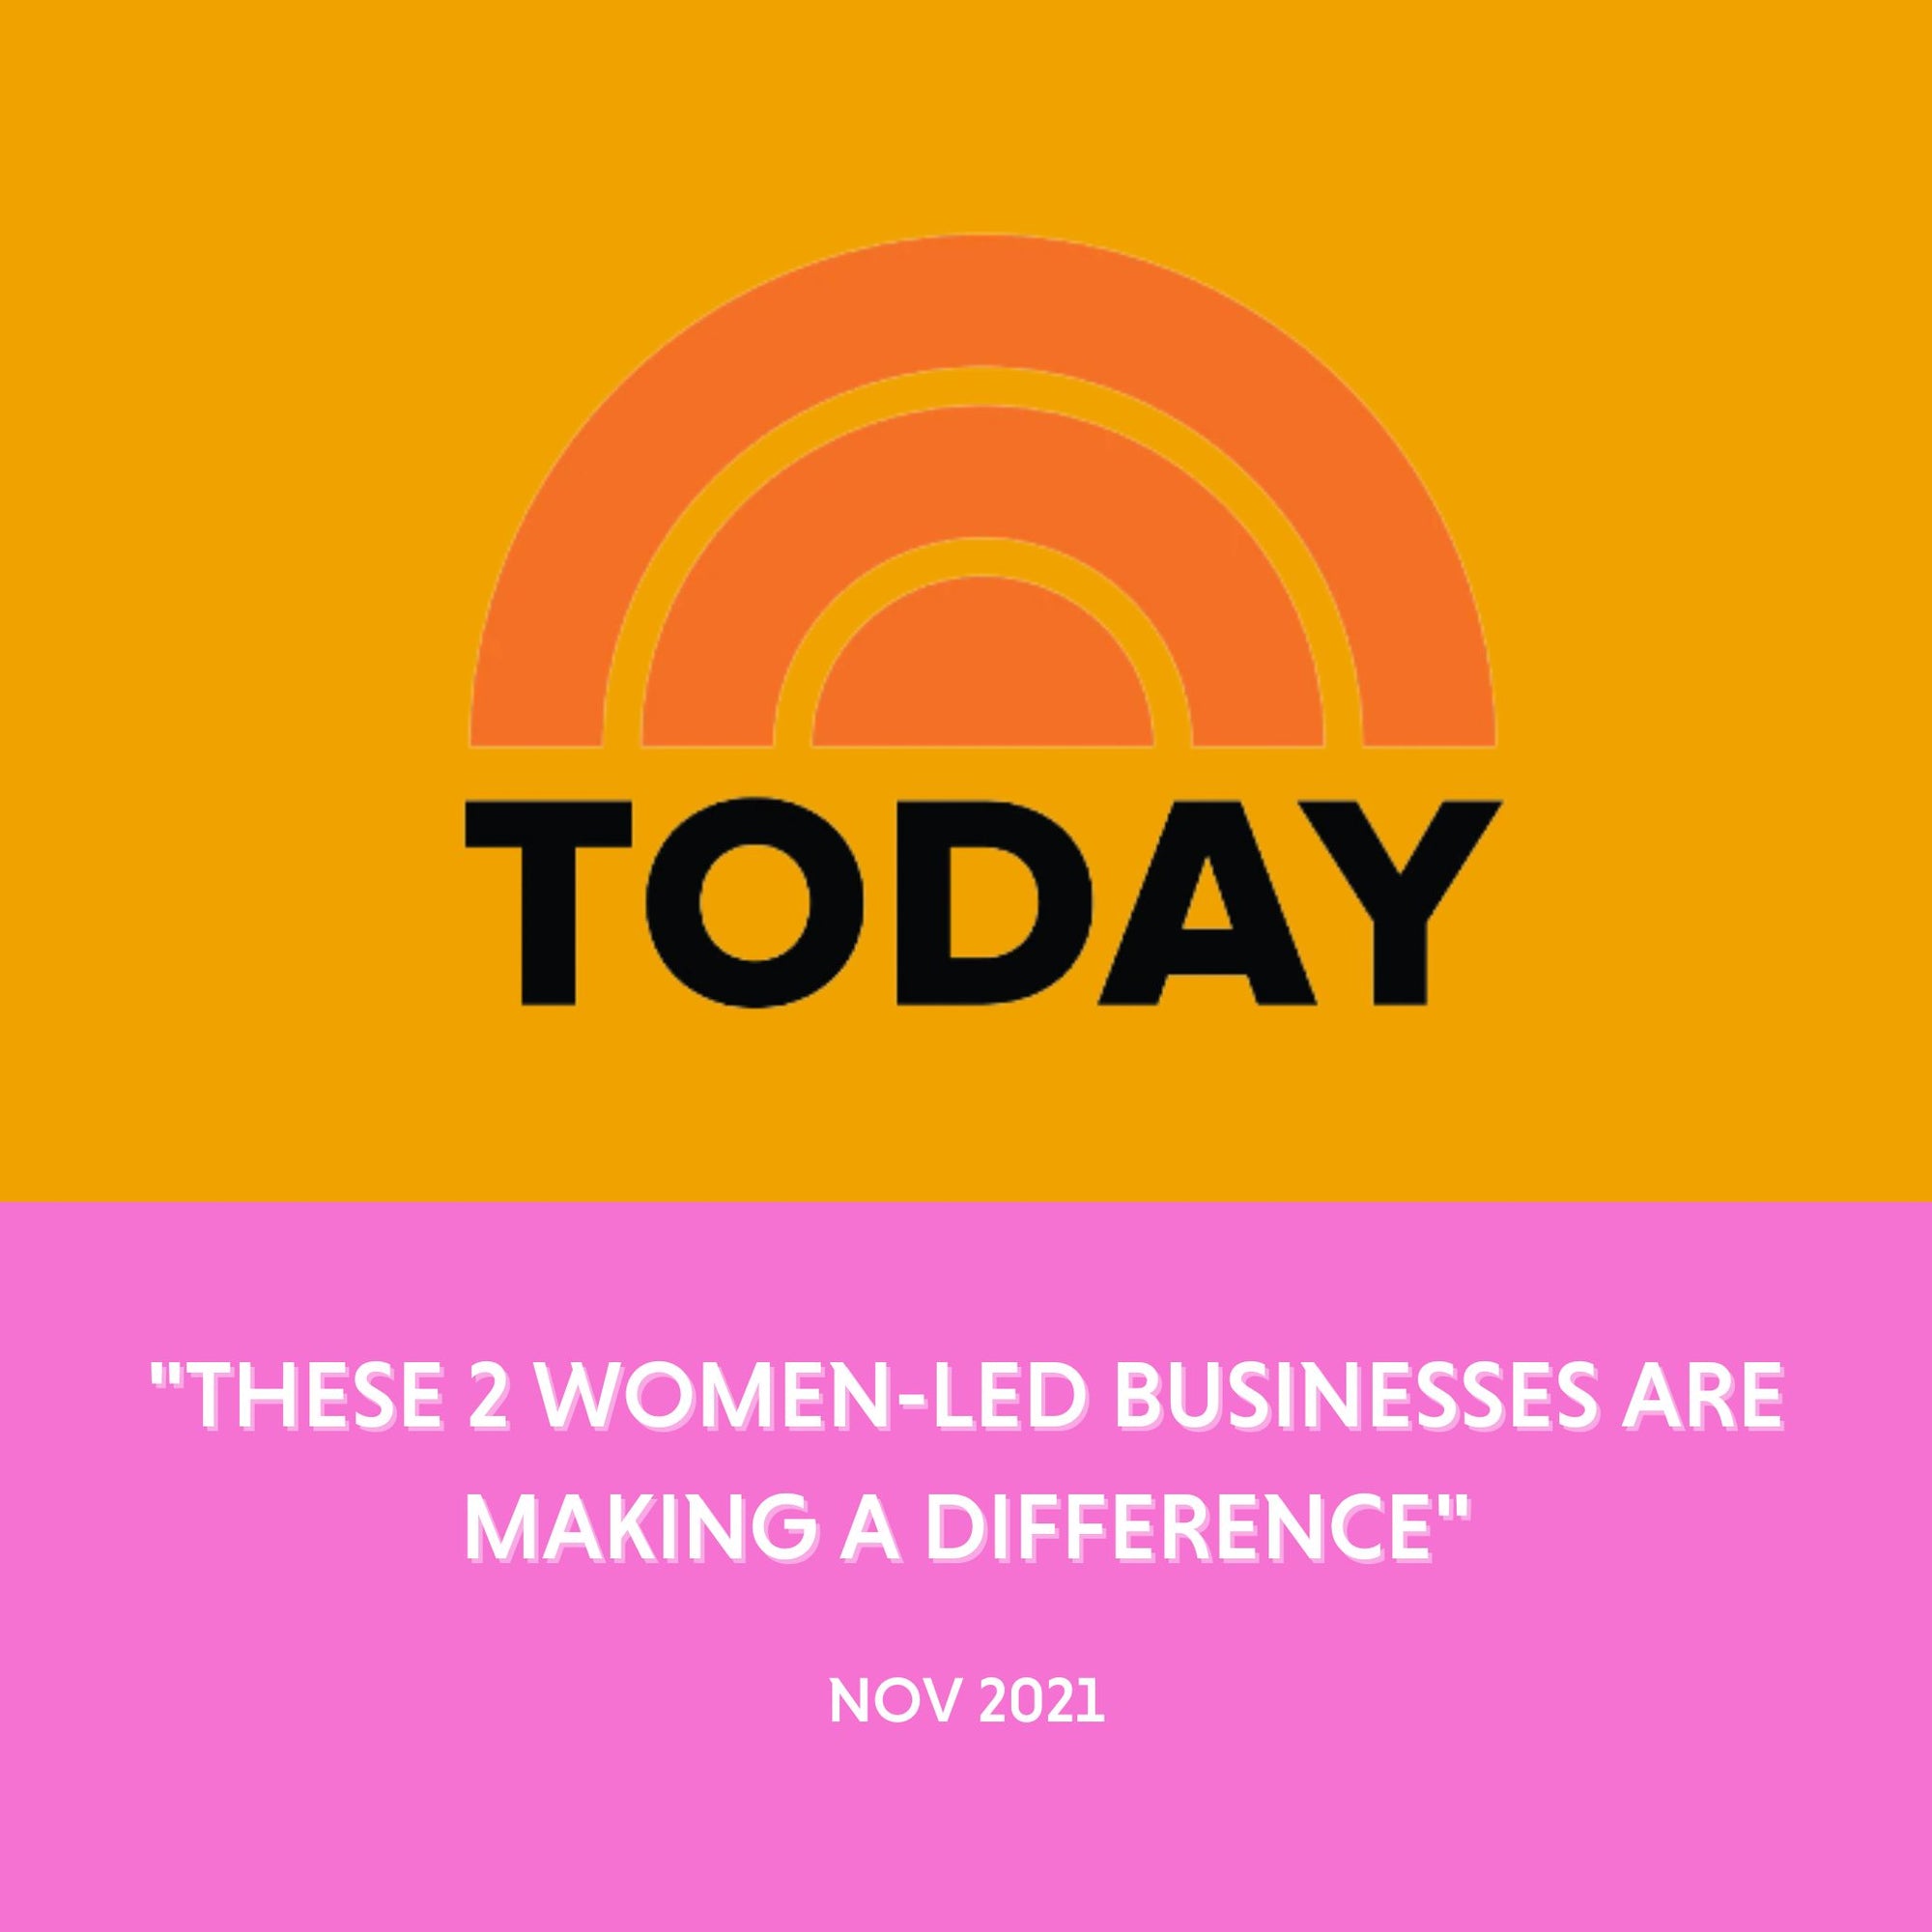 The Today Show - "These 2 women-led businesses are making a difference" - Nov 2021